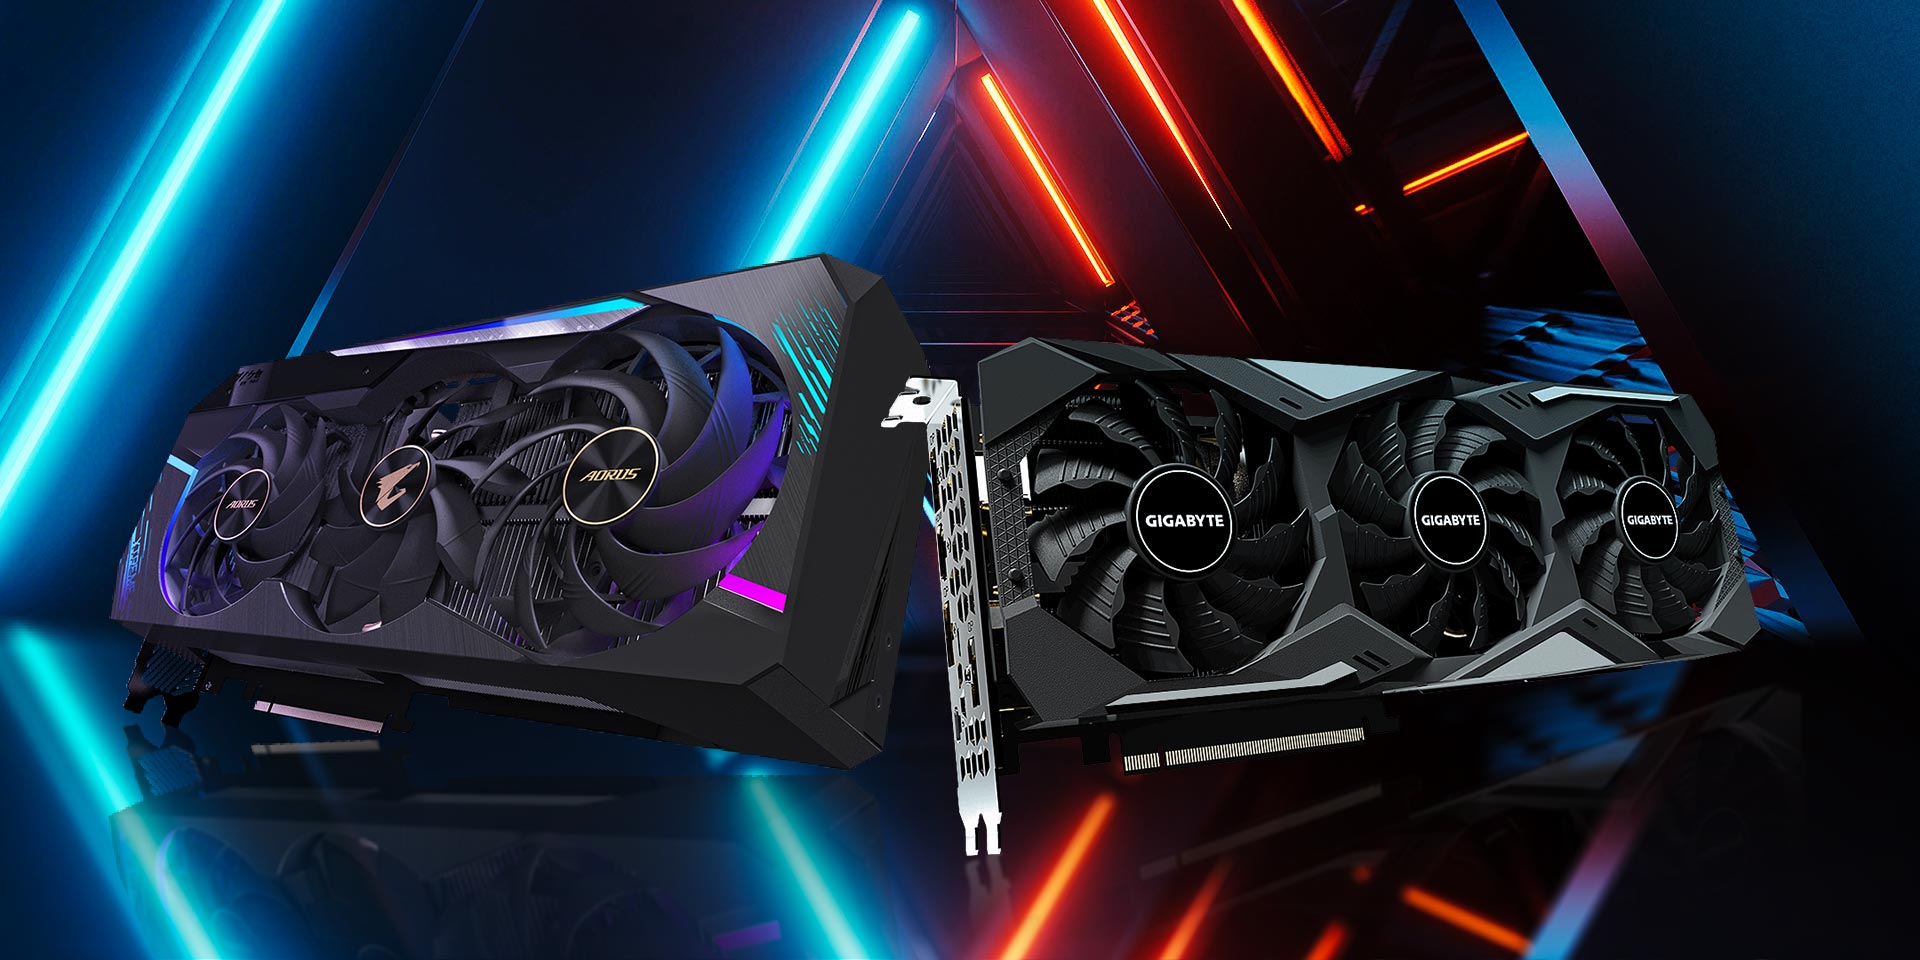 Get 4 Years Warranty for Your AORUS / GIGABYTE Graphics Card | AORUS